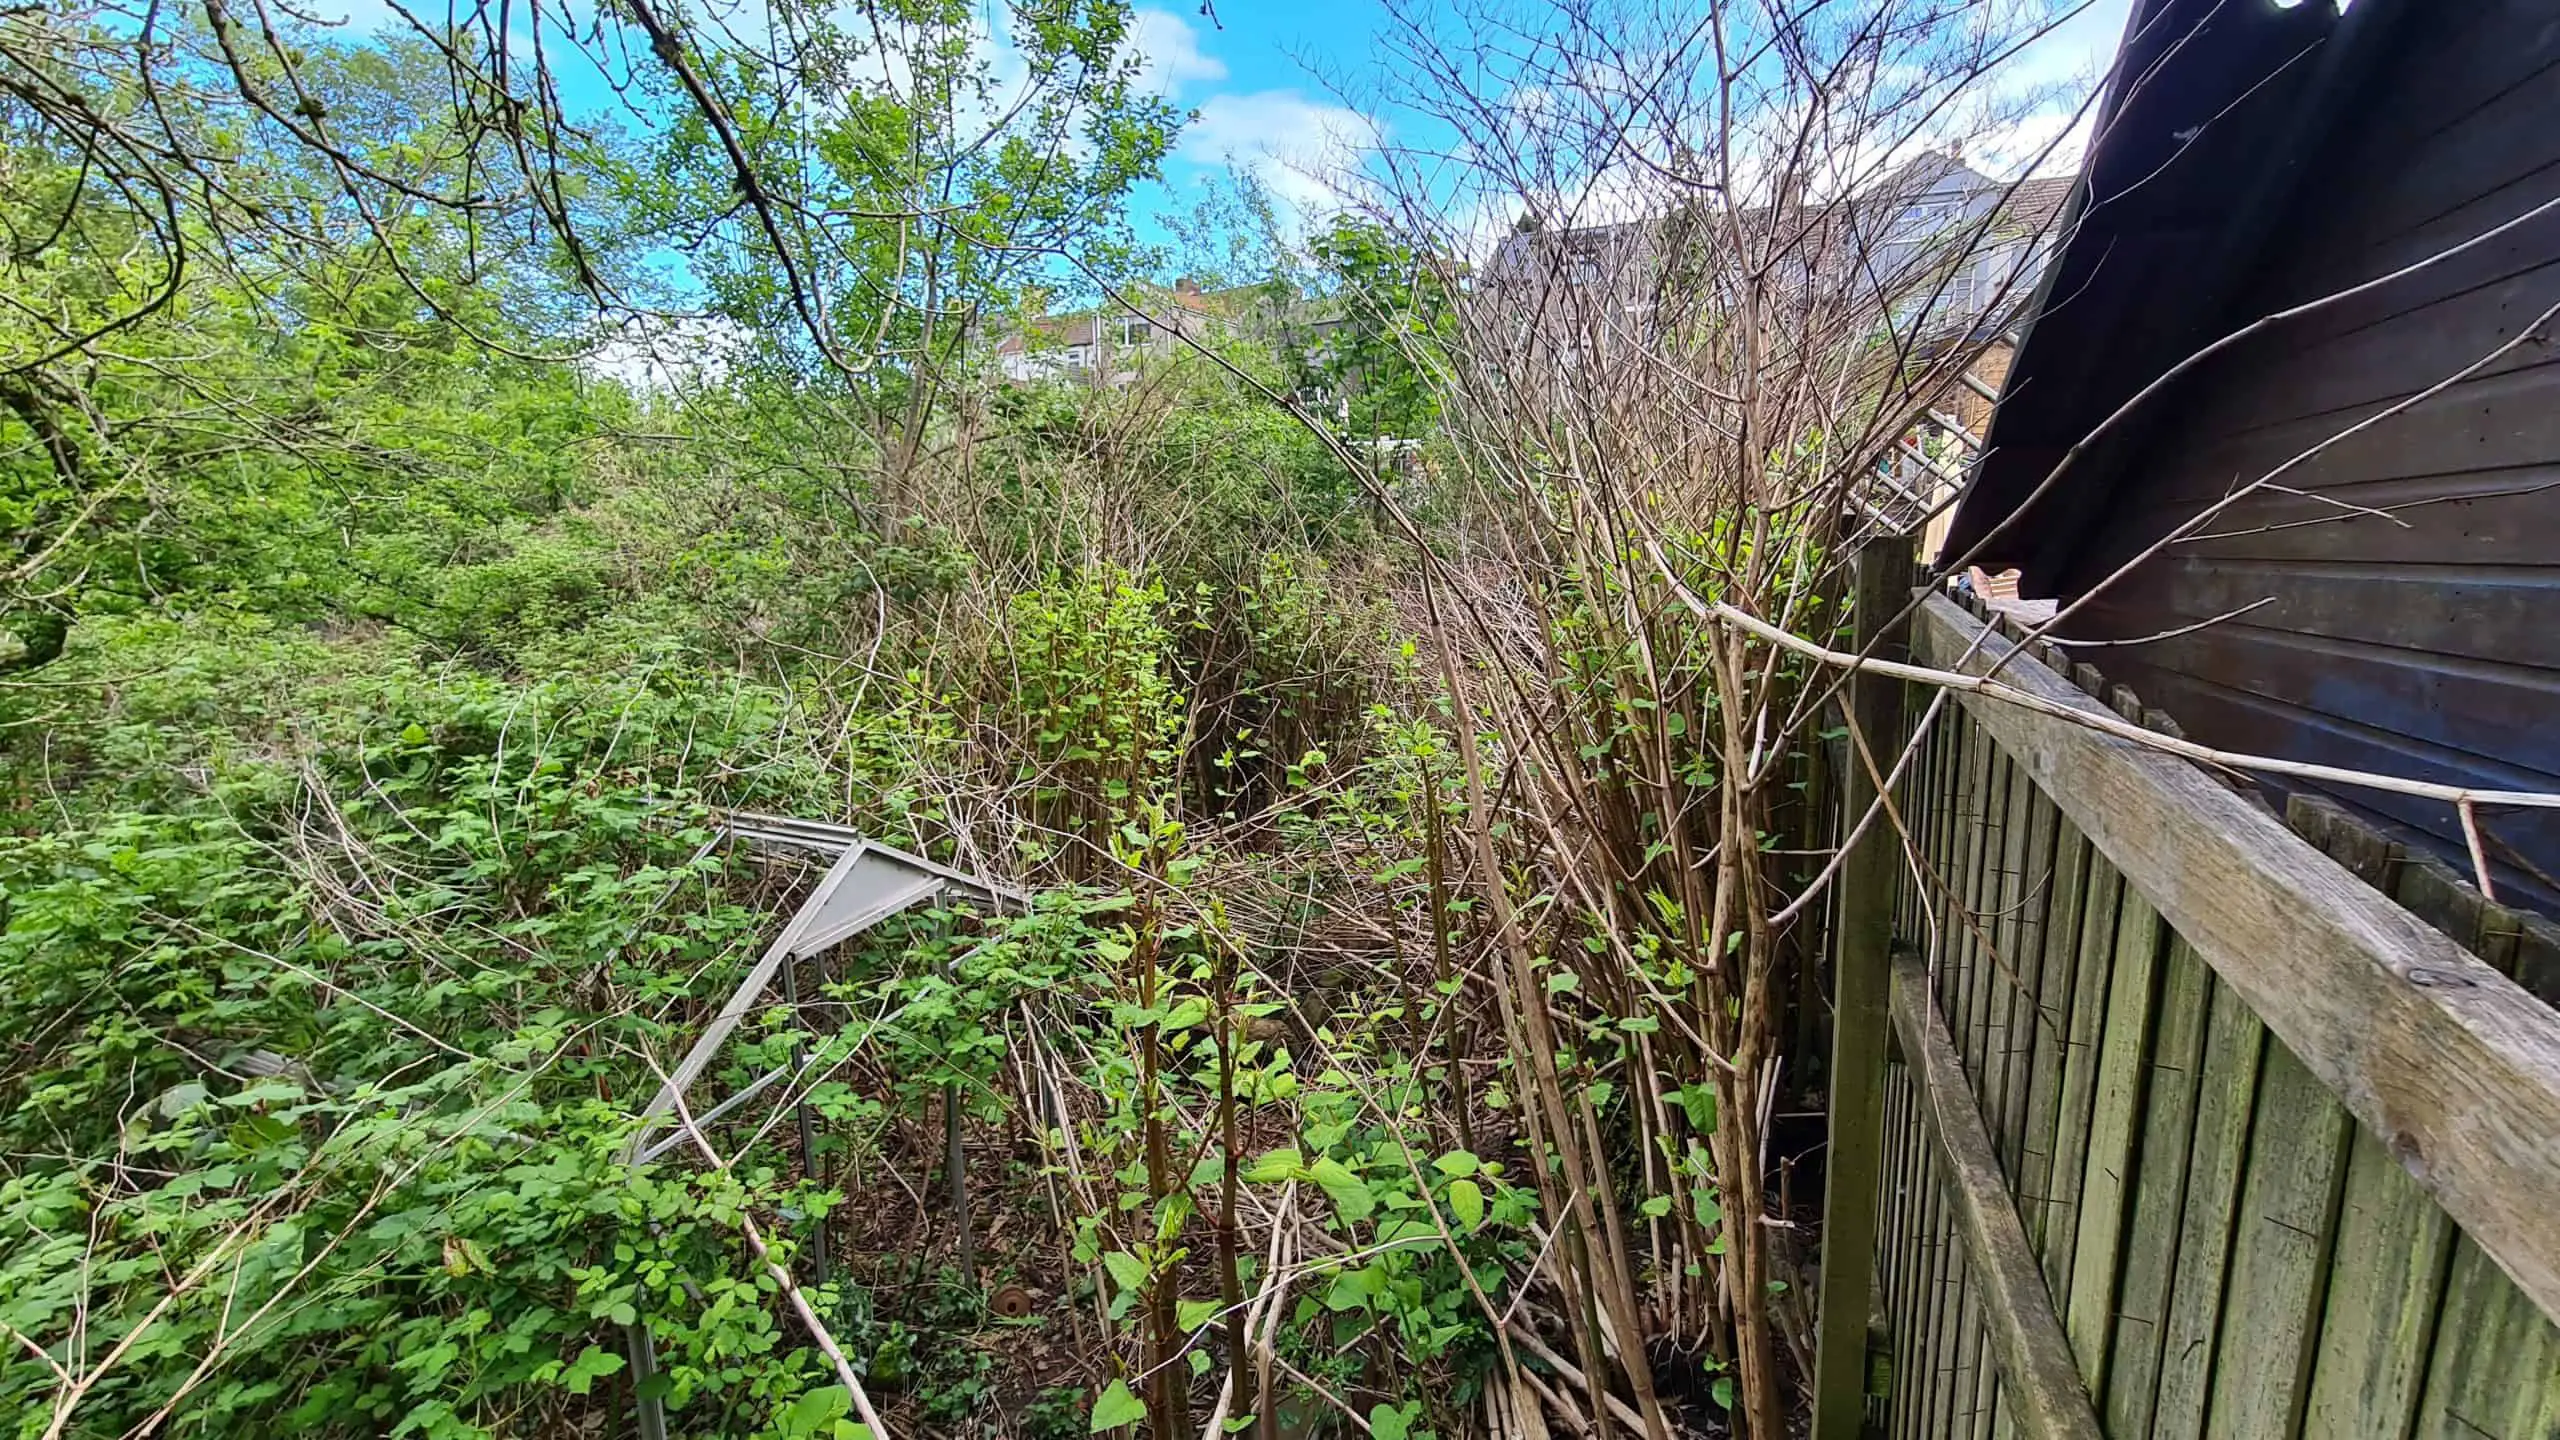 Buying or selling a property with Japanese knotweed on it can be a legal nightmare waiting to happen